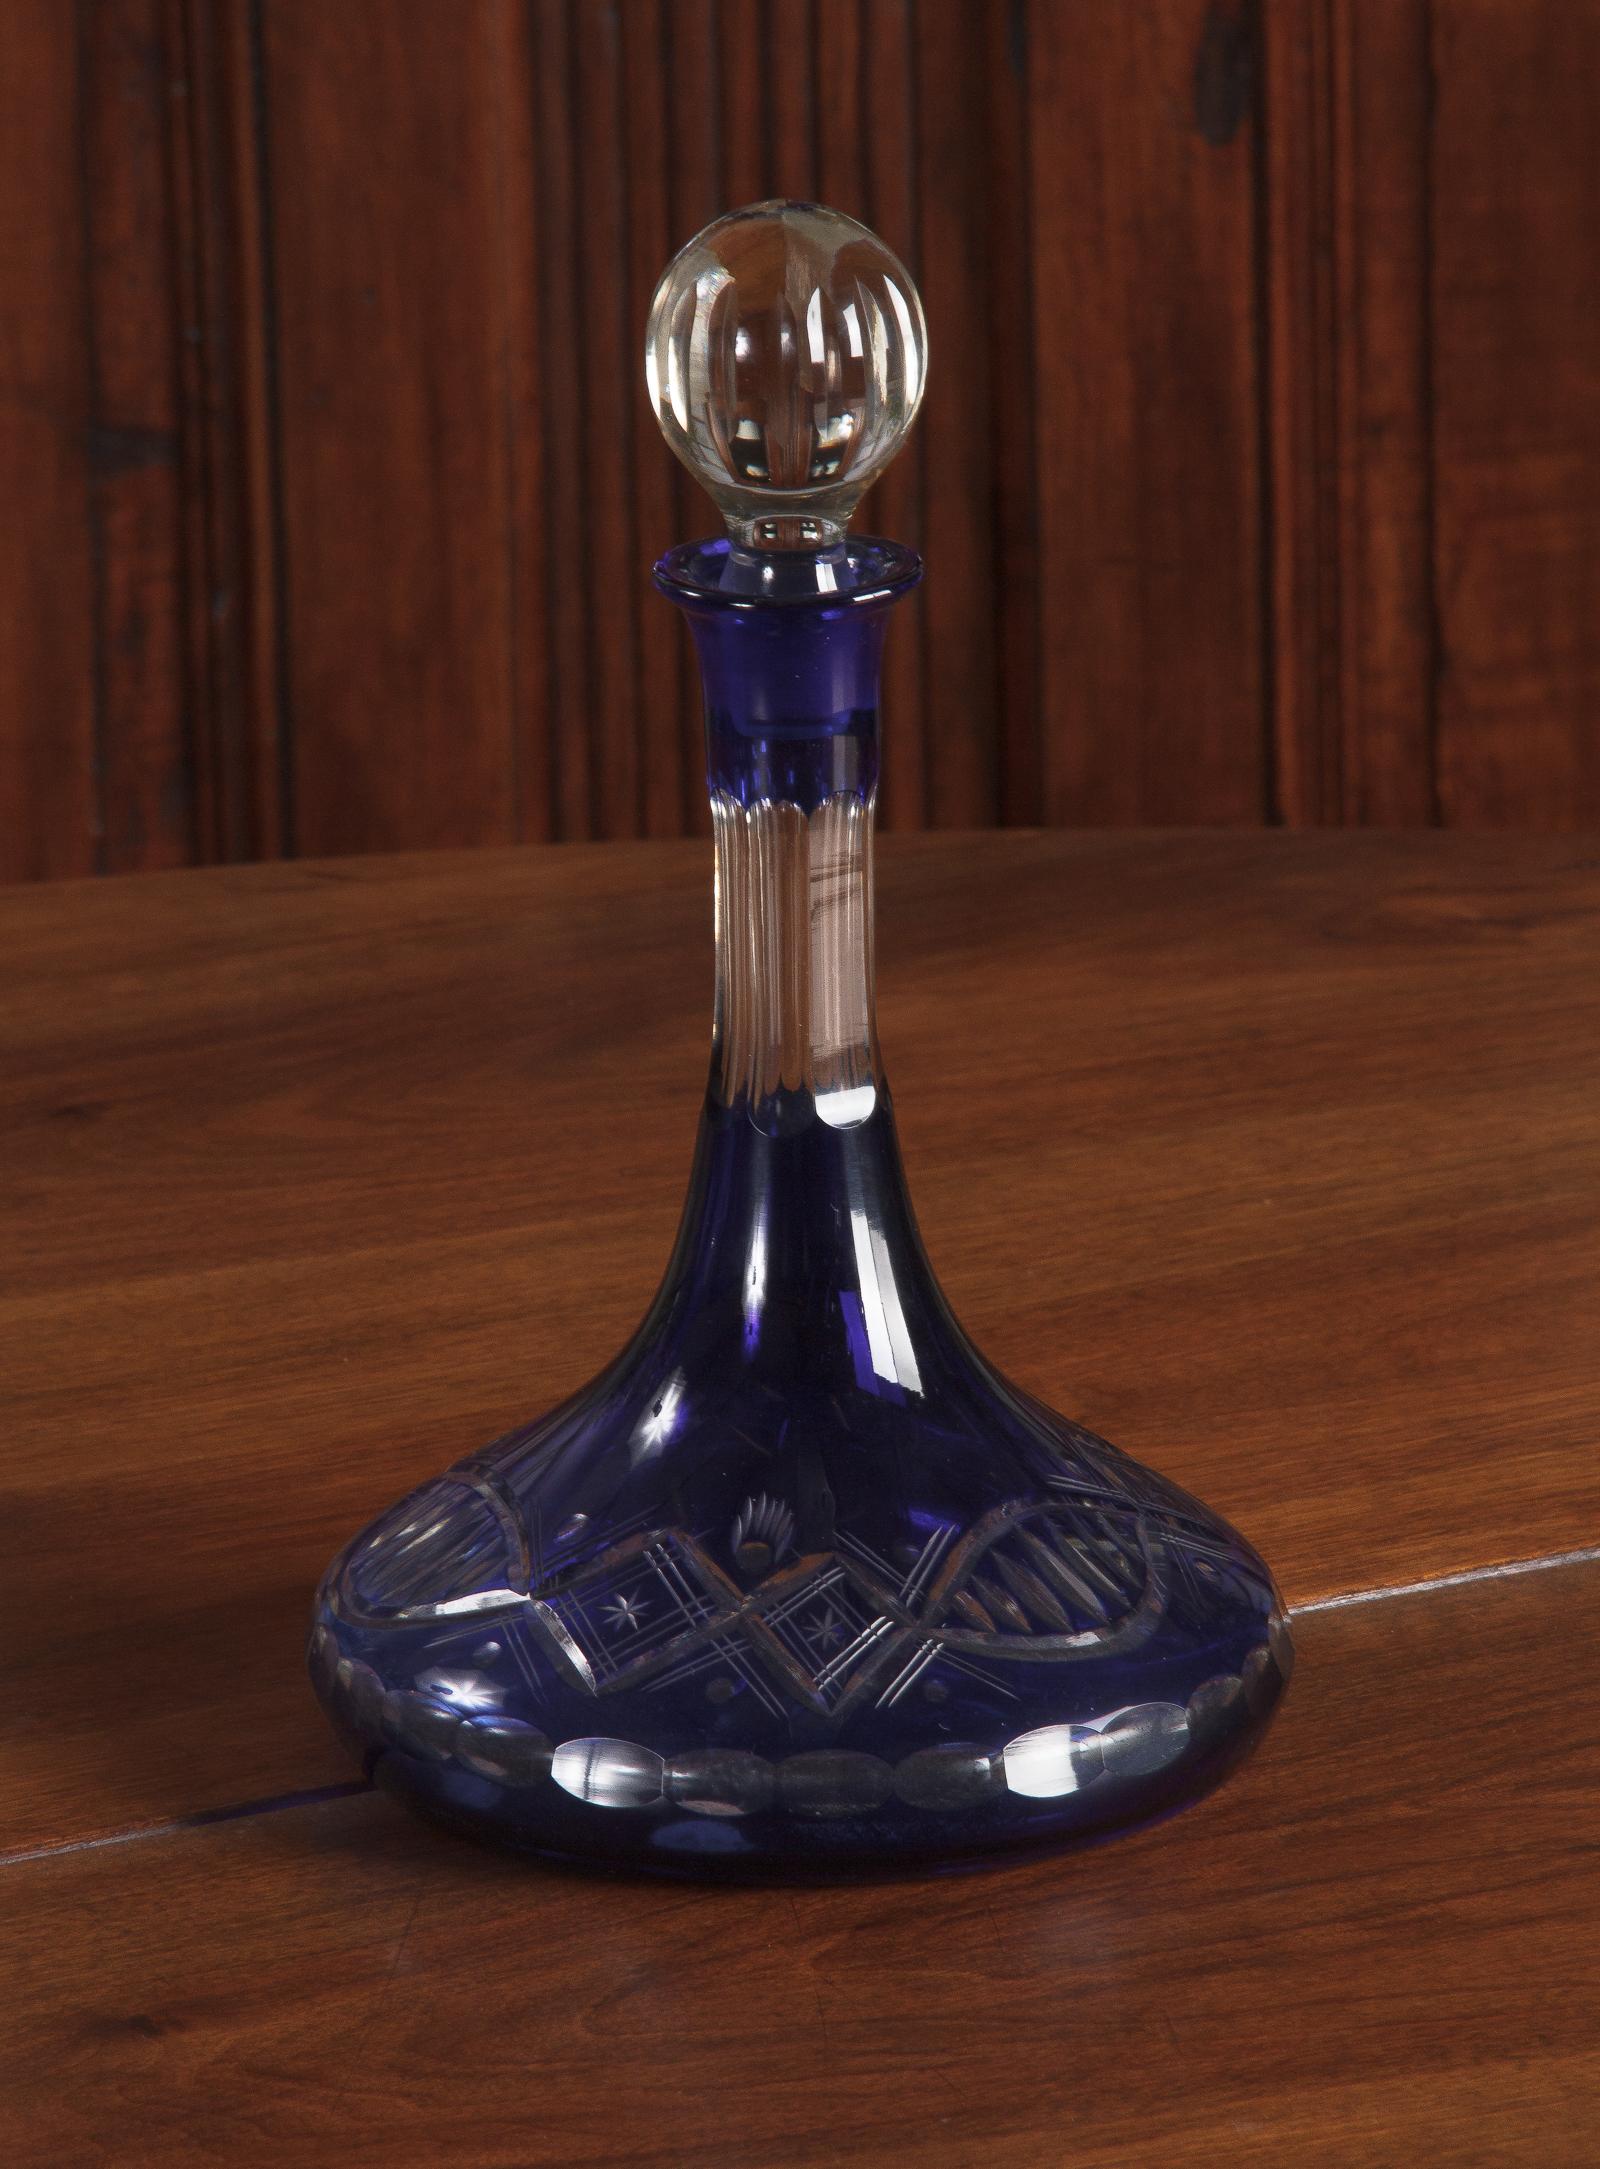 A dazzling cobalt blue Bohemian glass decanter with etched geometrical motifs, Czech Republic, circa 1900. Dramatically shaped with a low, wide belly that slopes up into a long, elegant neck, completed by a round glass stopper. The cobalt blue base